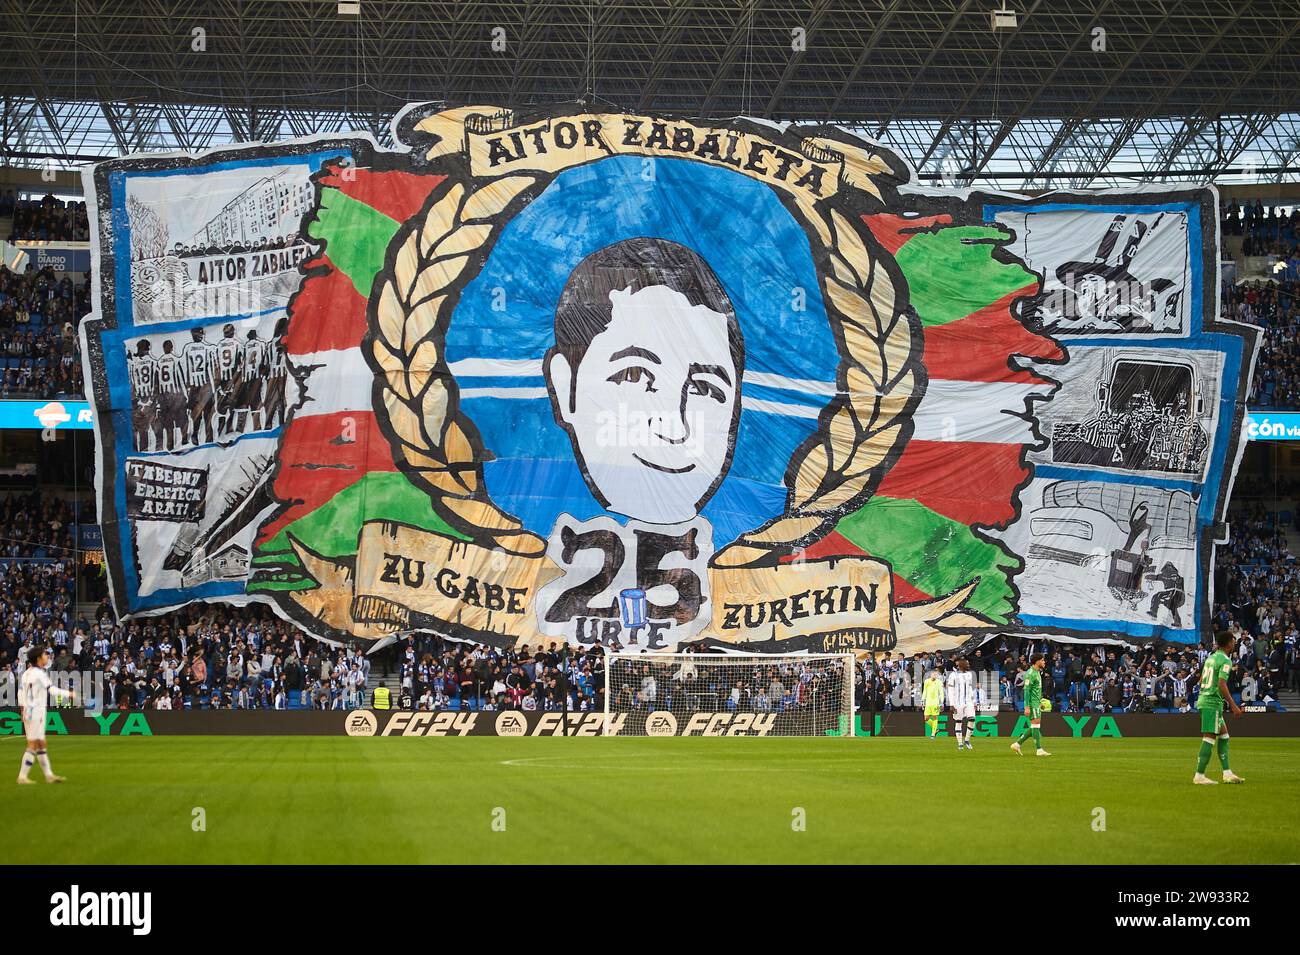 Real Sociedad fans show a banner in memory of Aitor Zabaleta during the LaLiga EA Sports match between Real Sociedad and Real Betis Balompie at Reale Stock Photo